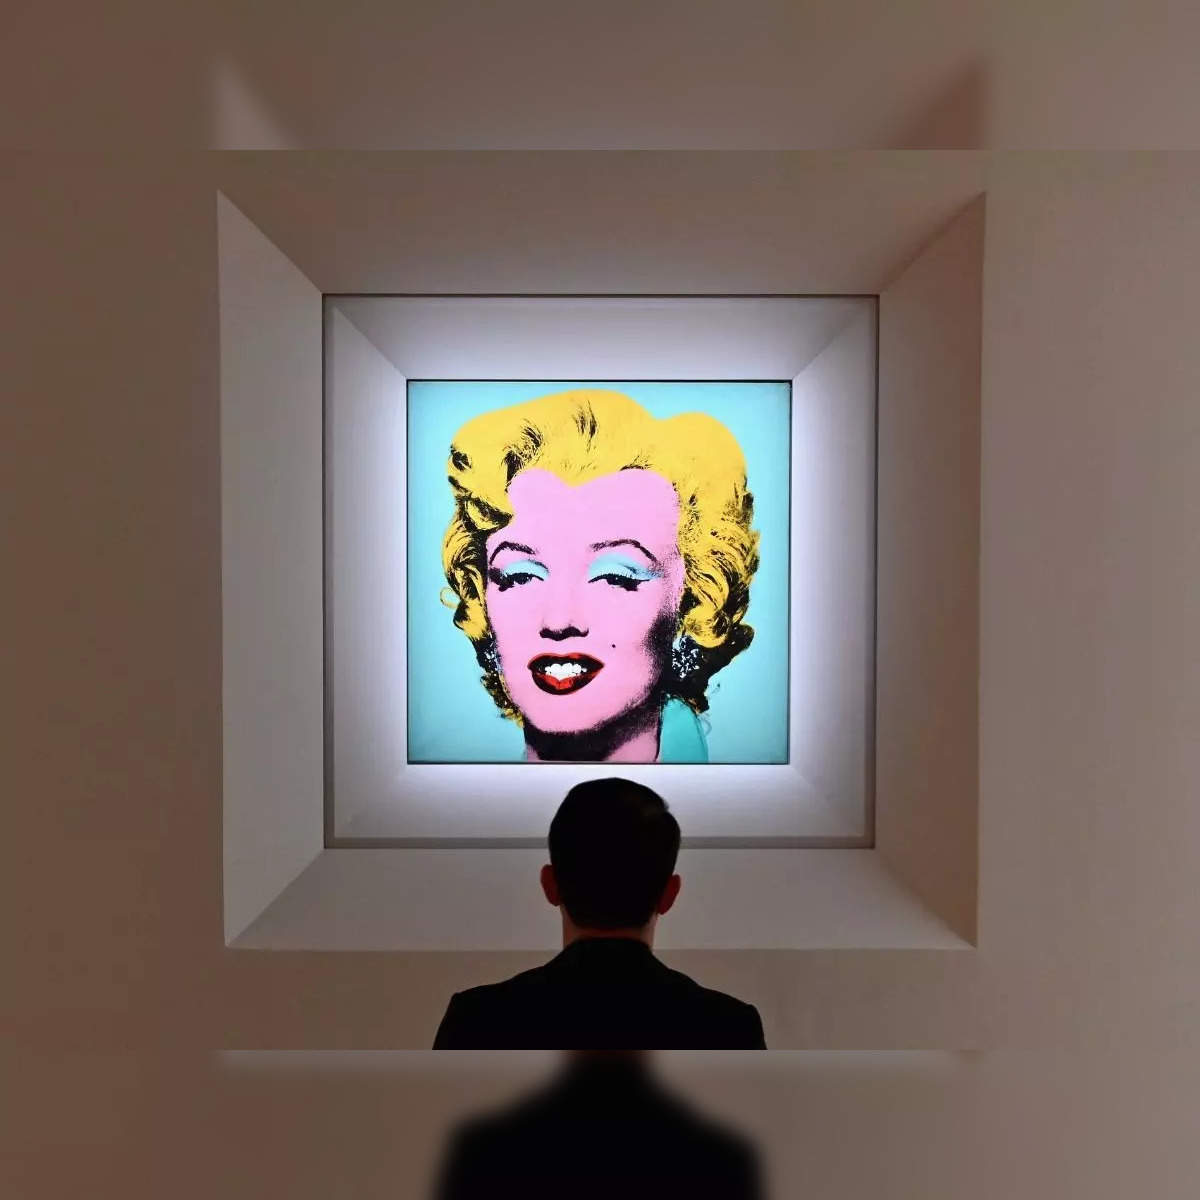 andy warhol: Marilyn Monroe's iconic portrait 'Shot Sage Blue Marilyn' by Andy  Warhol sold for record-breaking $195 mn - The Economic Times